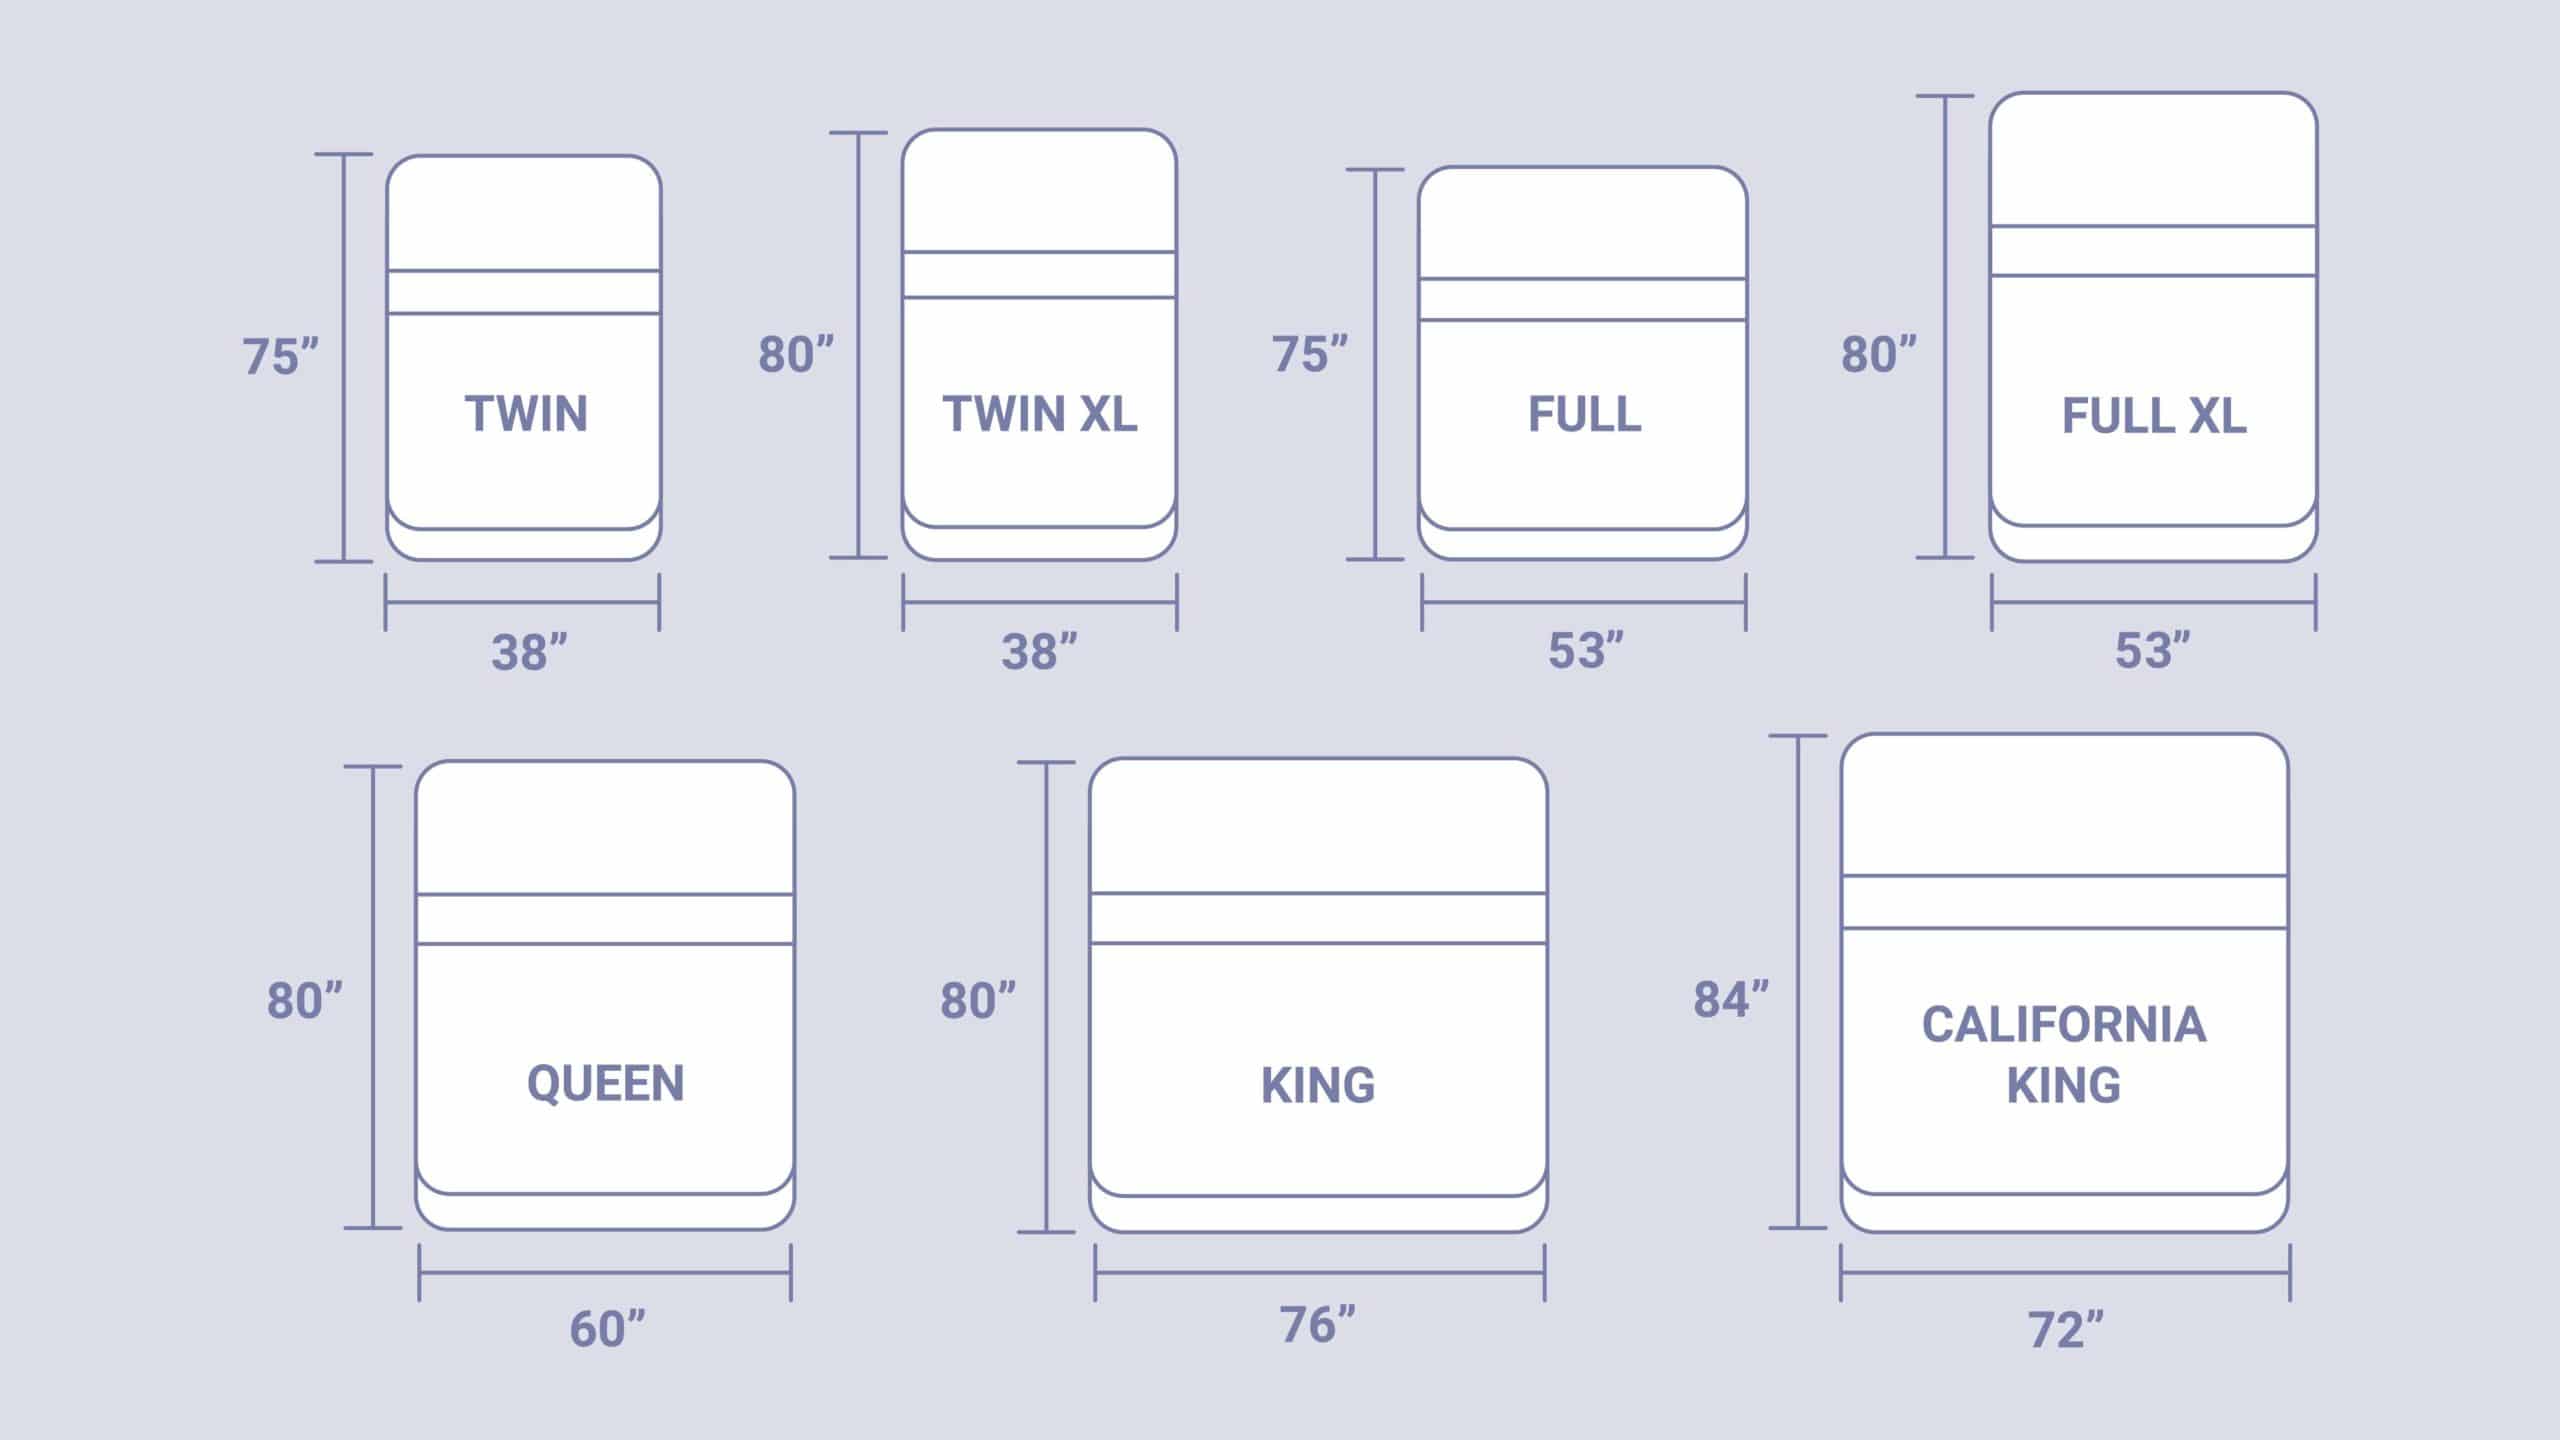 Mattress Sizes And Dimensions Guide, What Size Is A Twin Bed Mattress